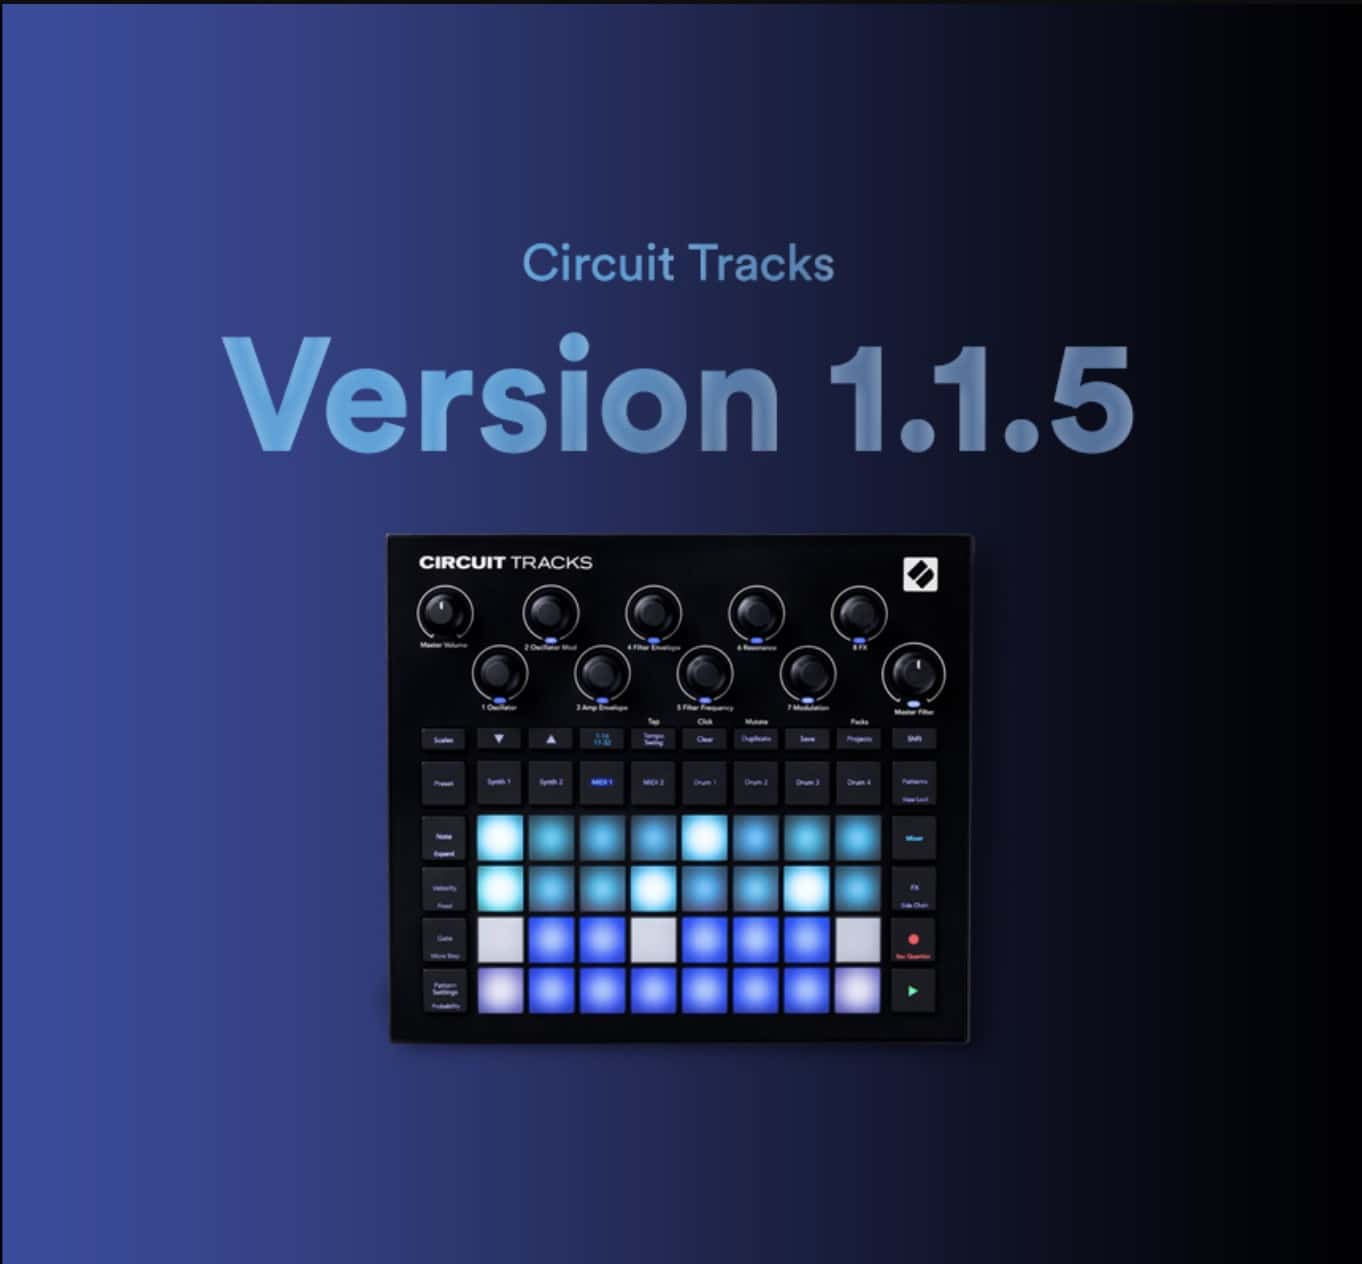 New in Novation Circuit Tracks Version 1.1.5